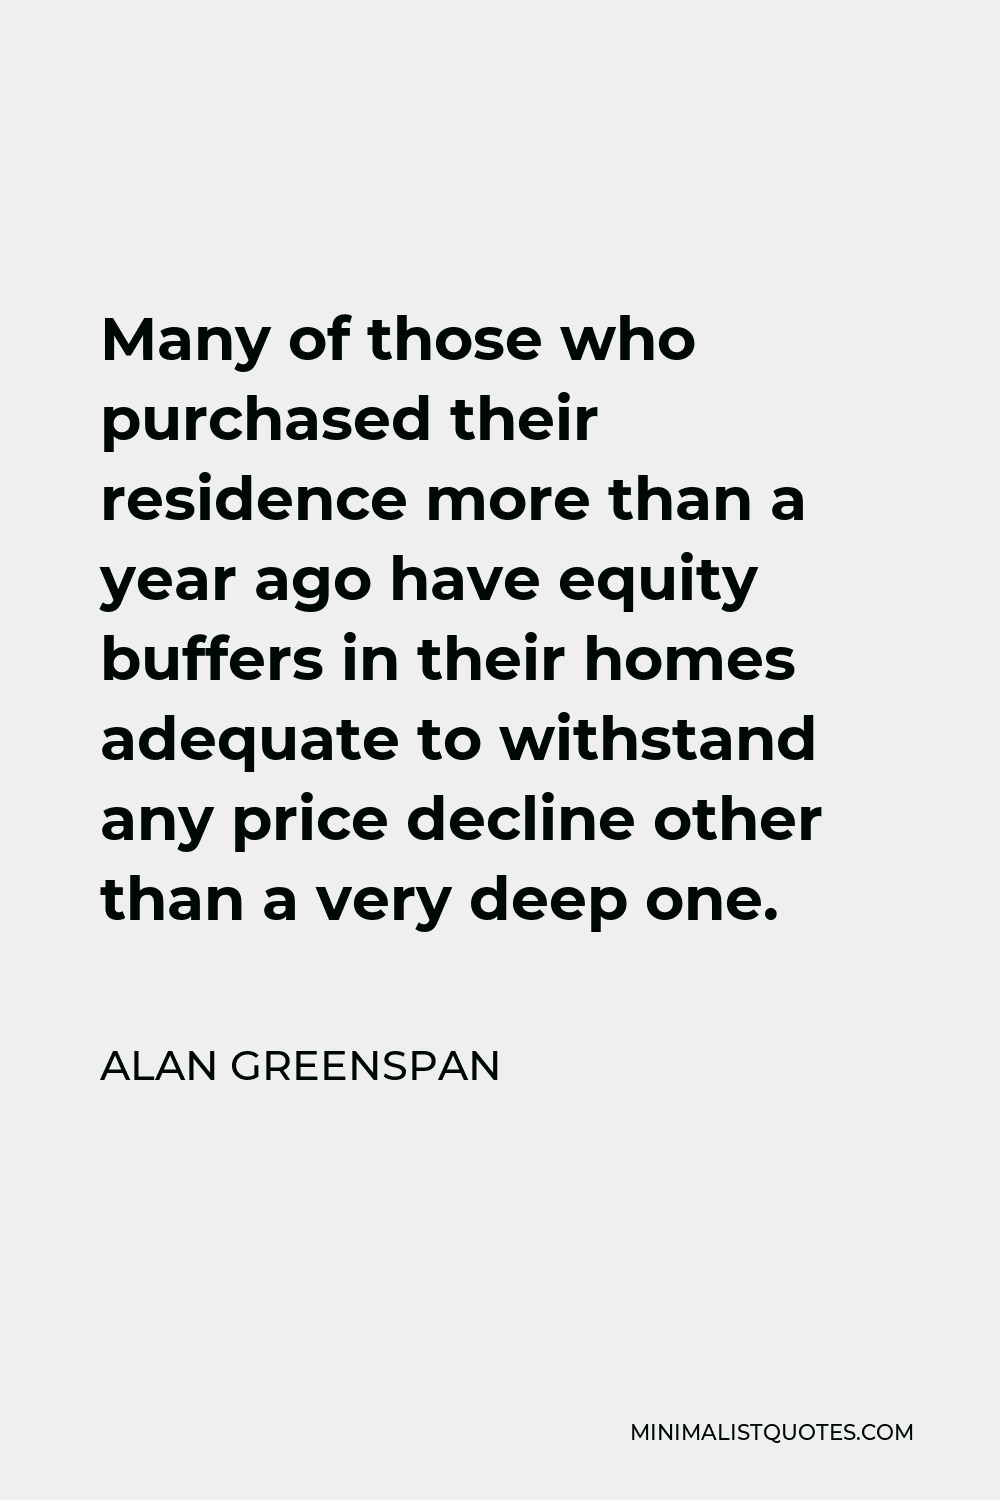 Alan Greenspan Quote - Many of those who purchased their residence more than a year ago have equity buffers in their homes adequate to withstand any price decline other than a very deep one.